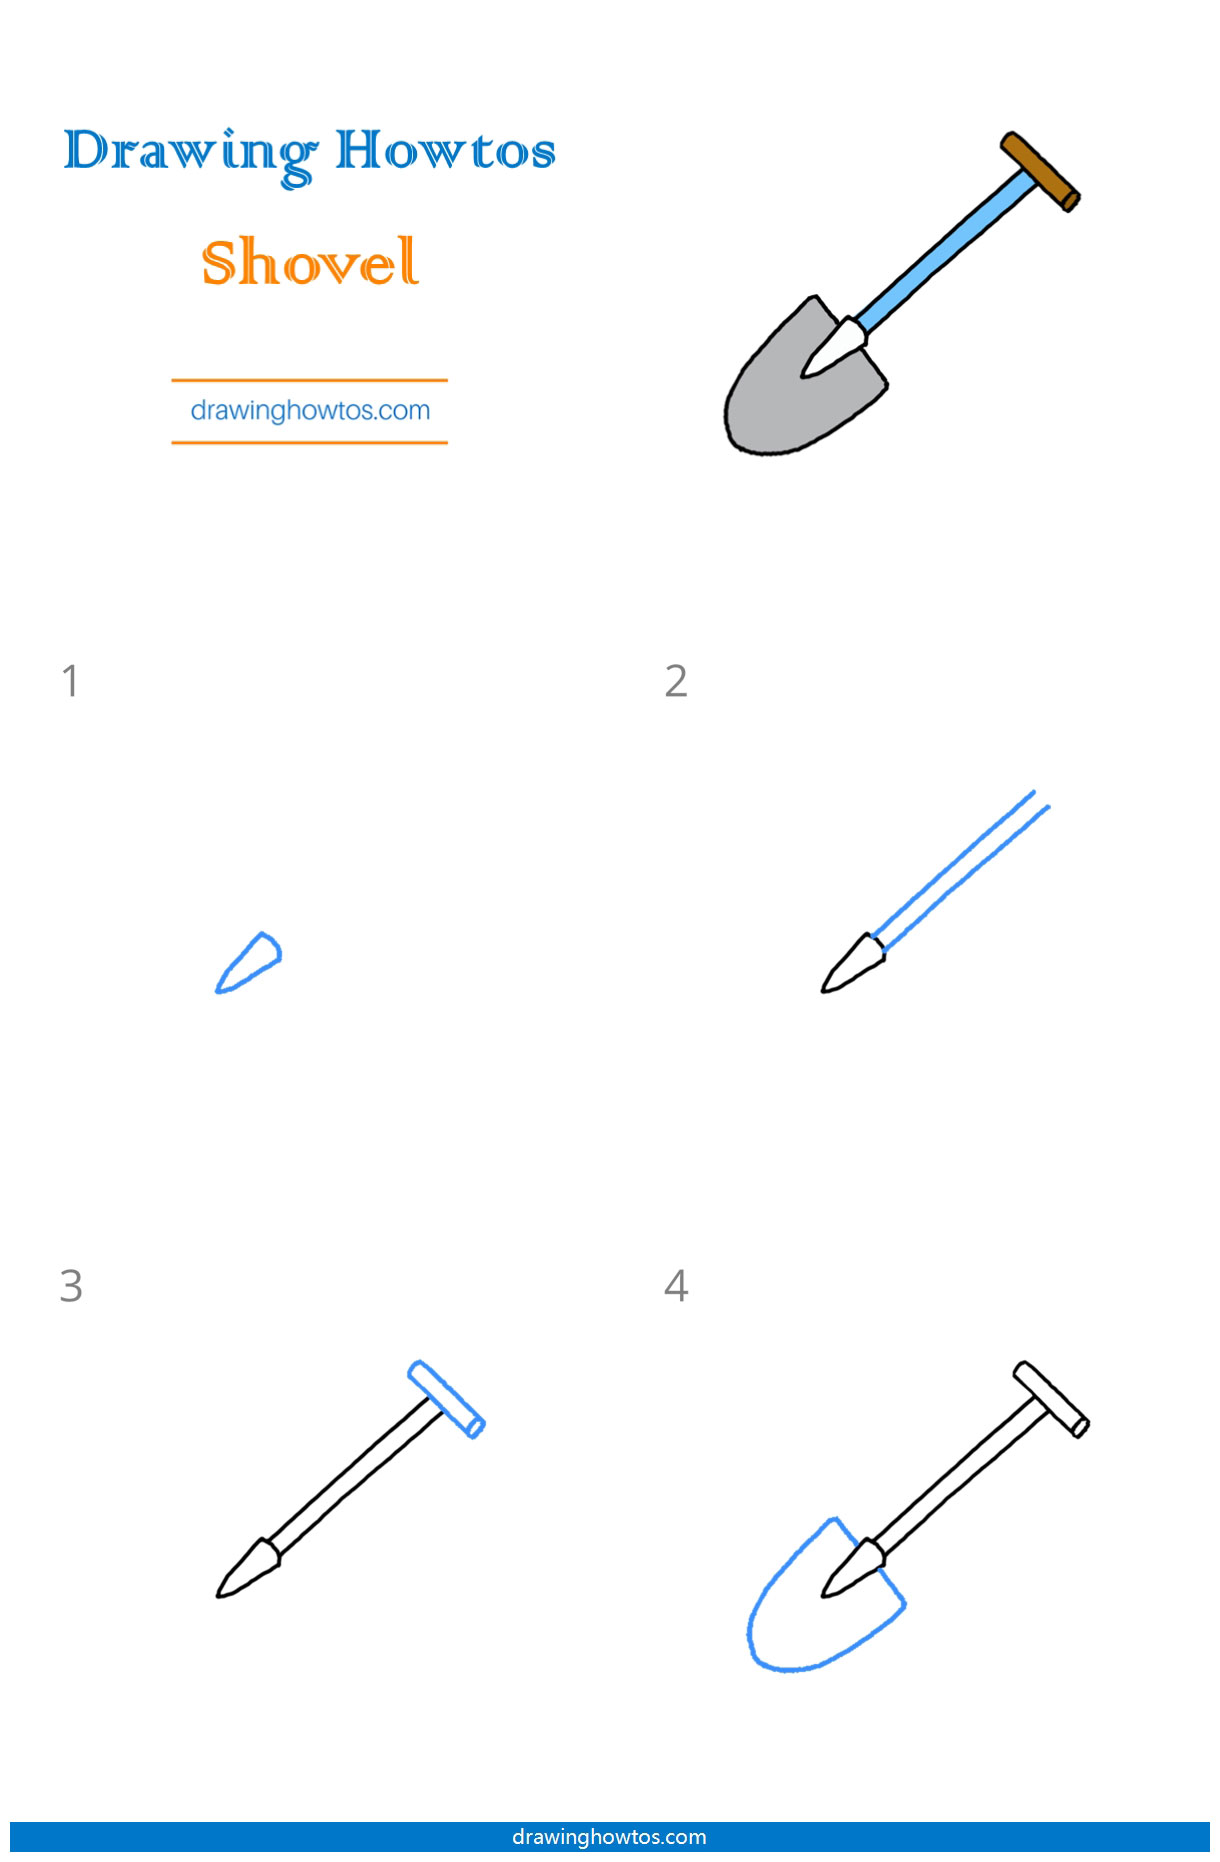 How to Draw a Shovel Step by Step